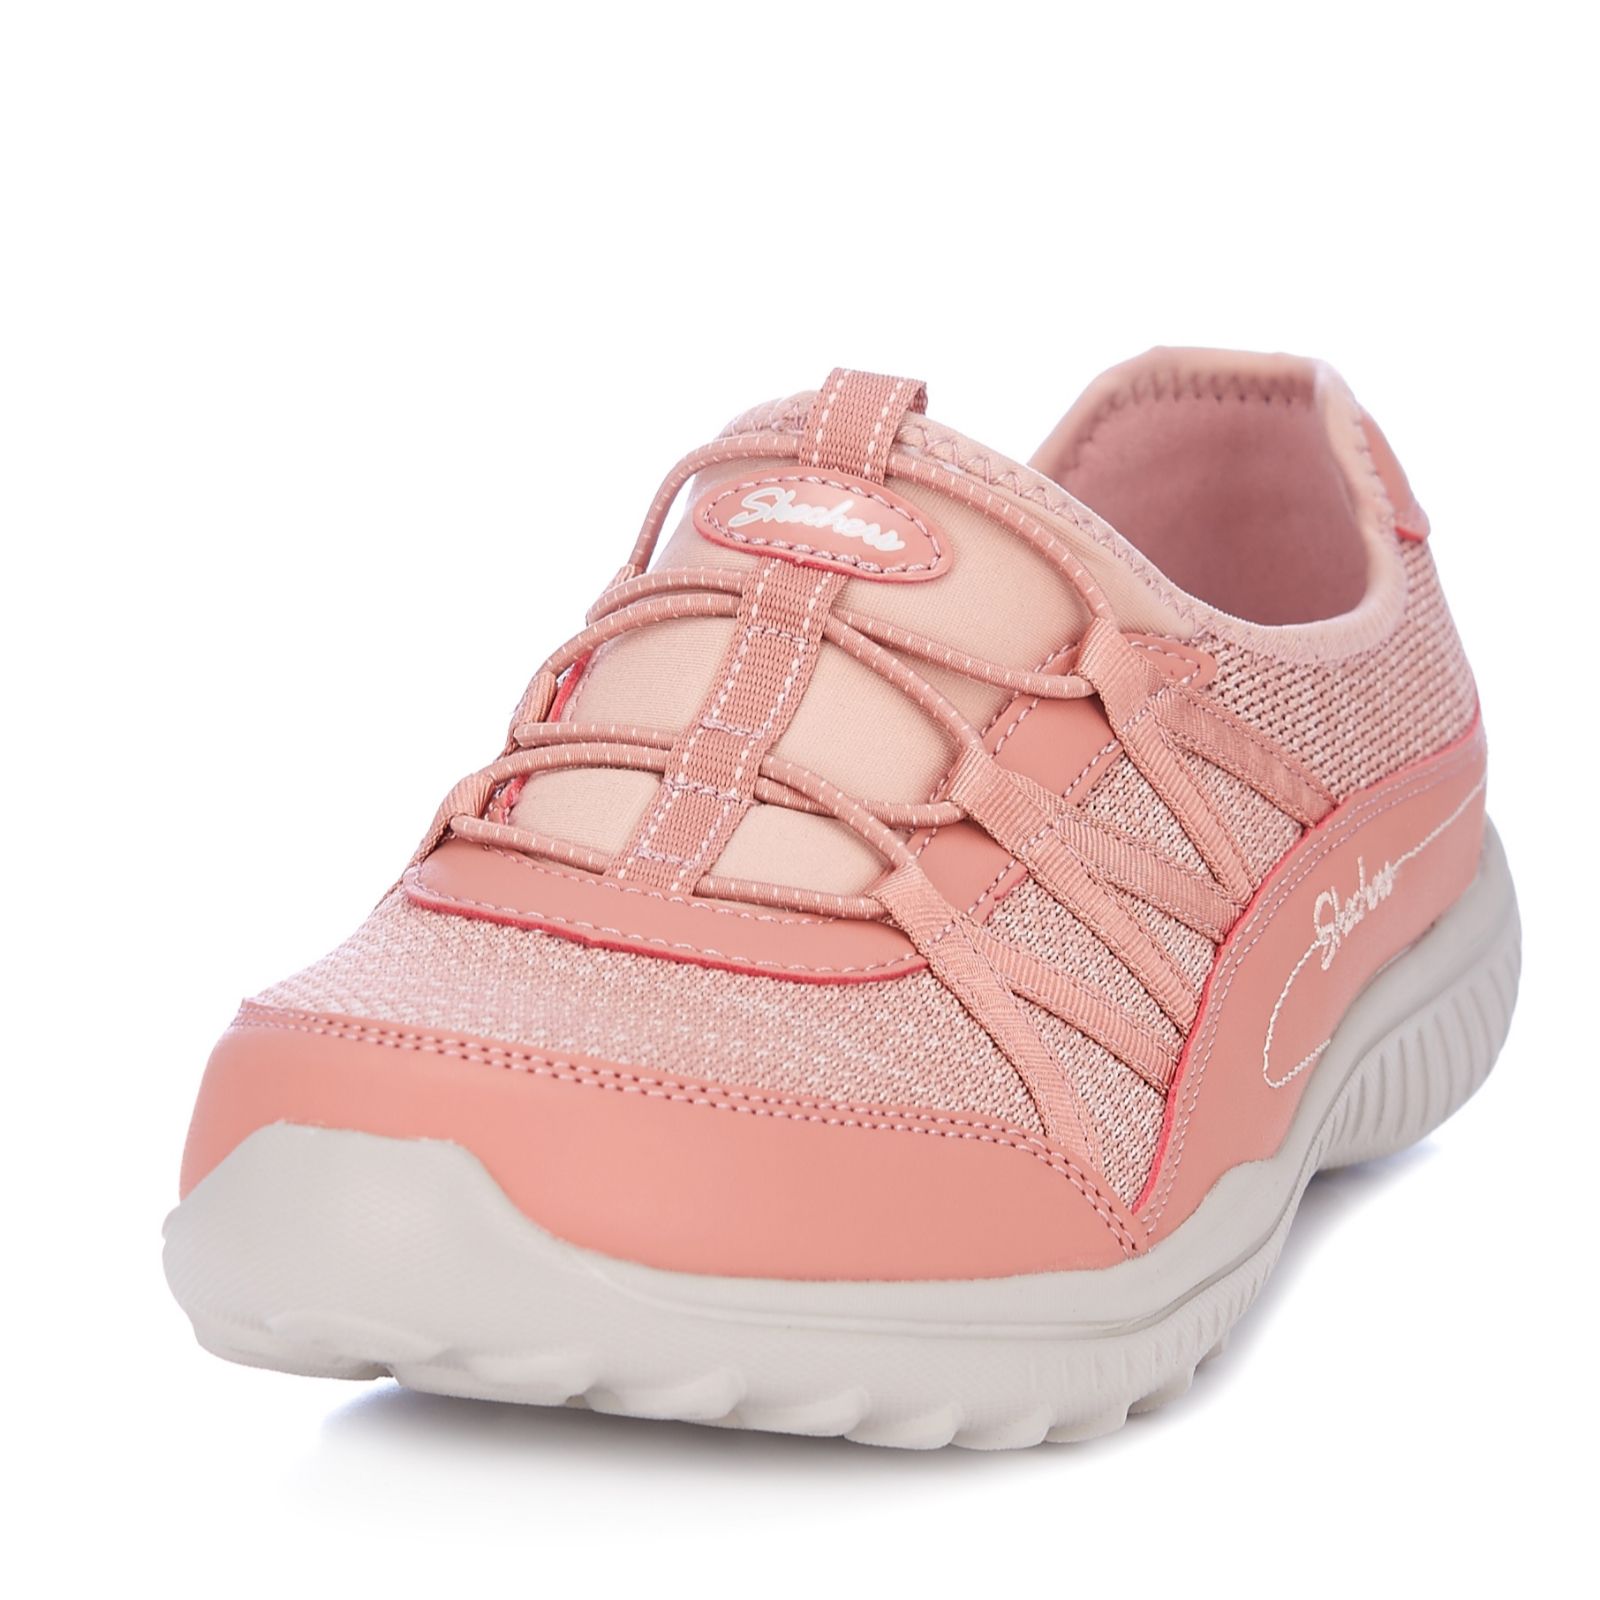 skechers be lite classic fit bungee